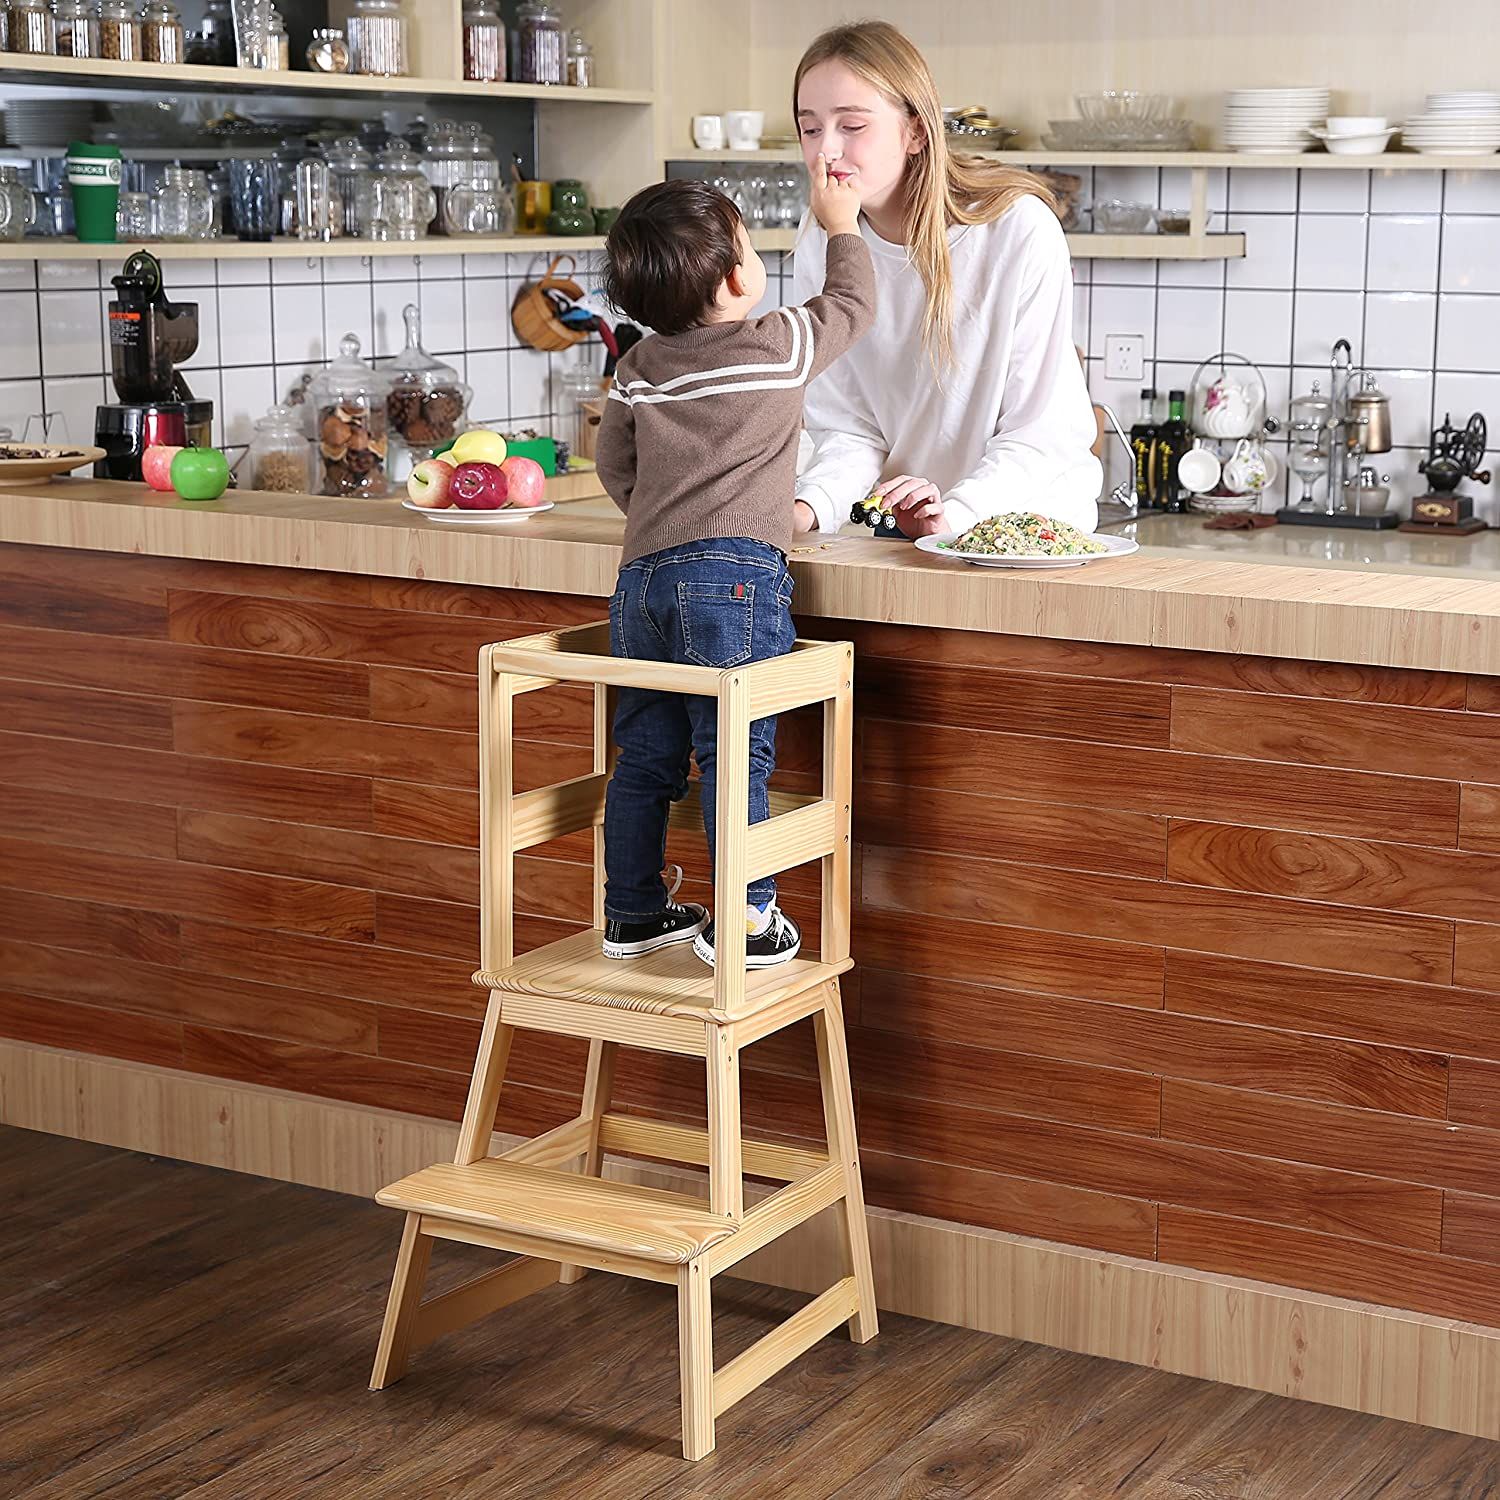 SDADI Kids Kitchen Step Stool with Safety Rail - for Toddlers 18 Months and Older, Natural LT01N | Amazon (US)